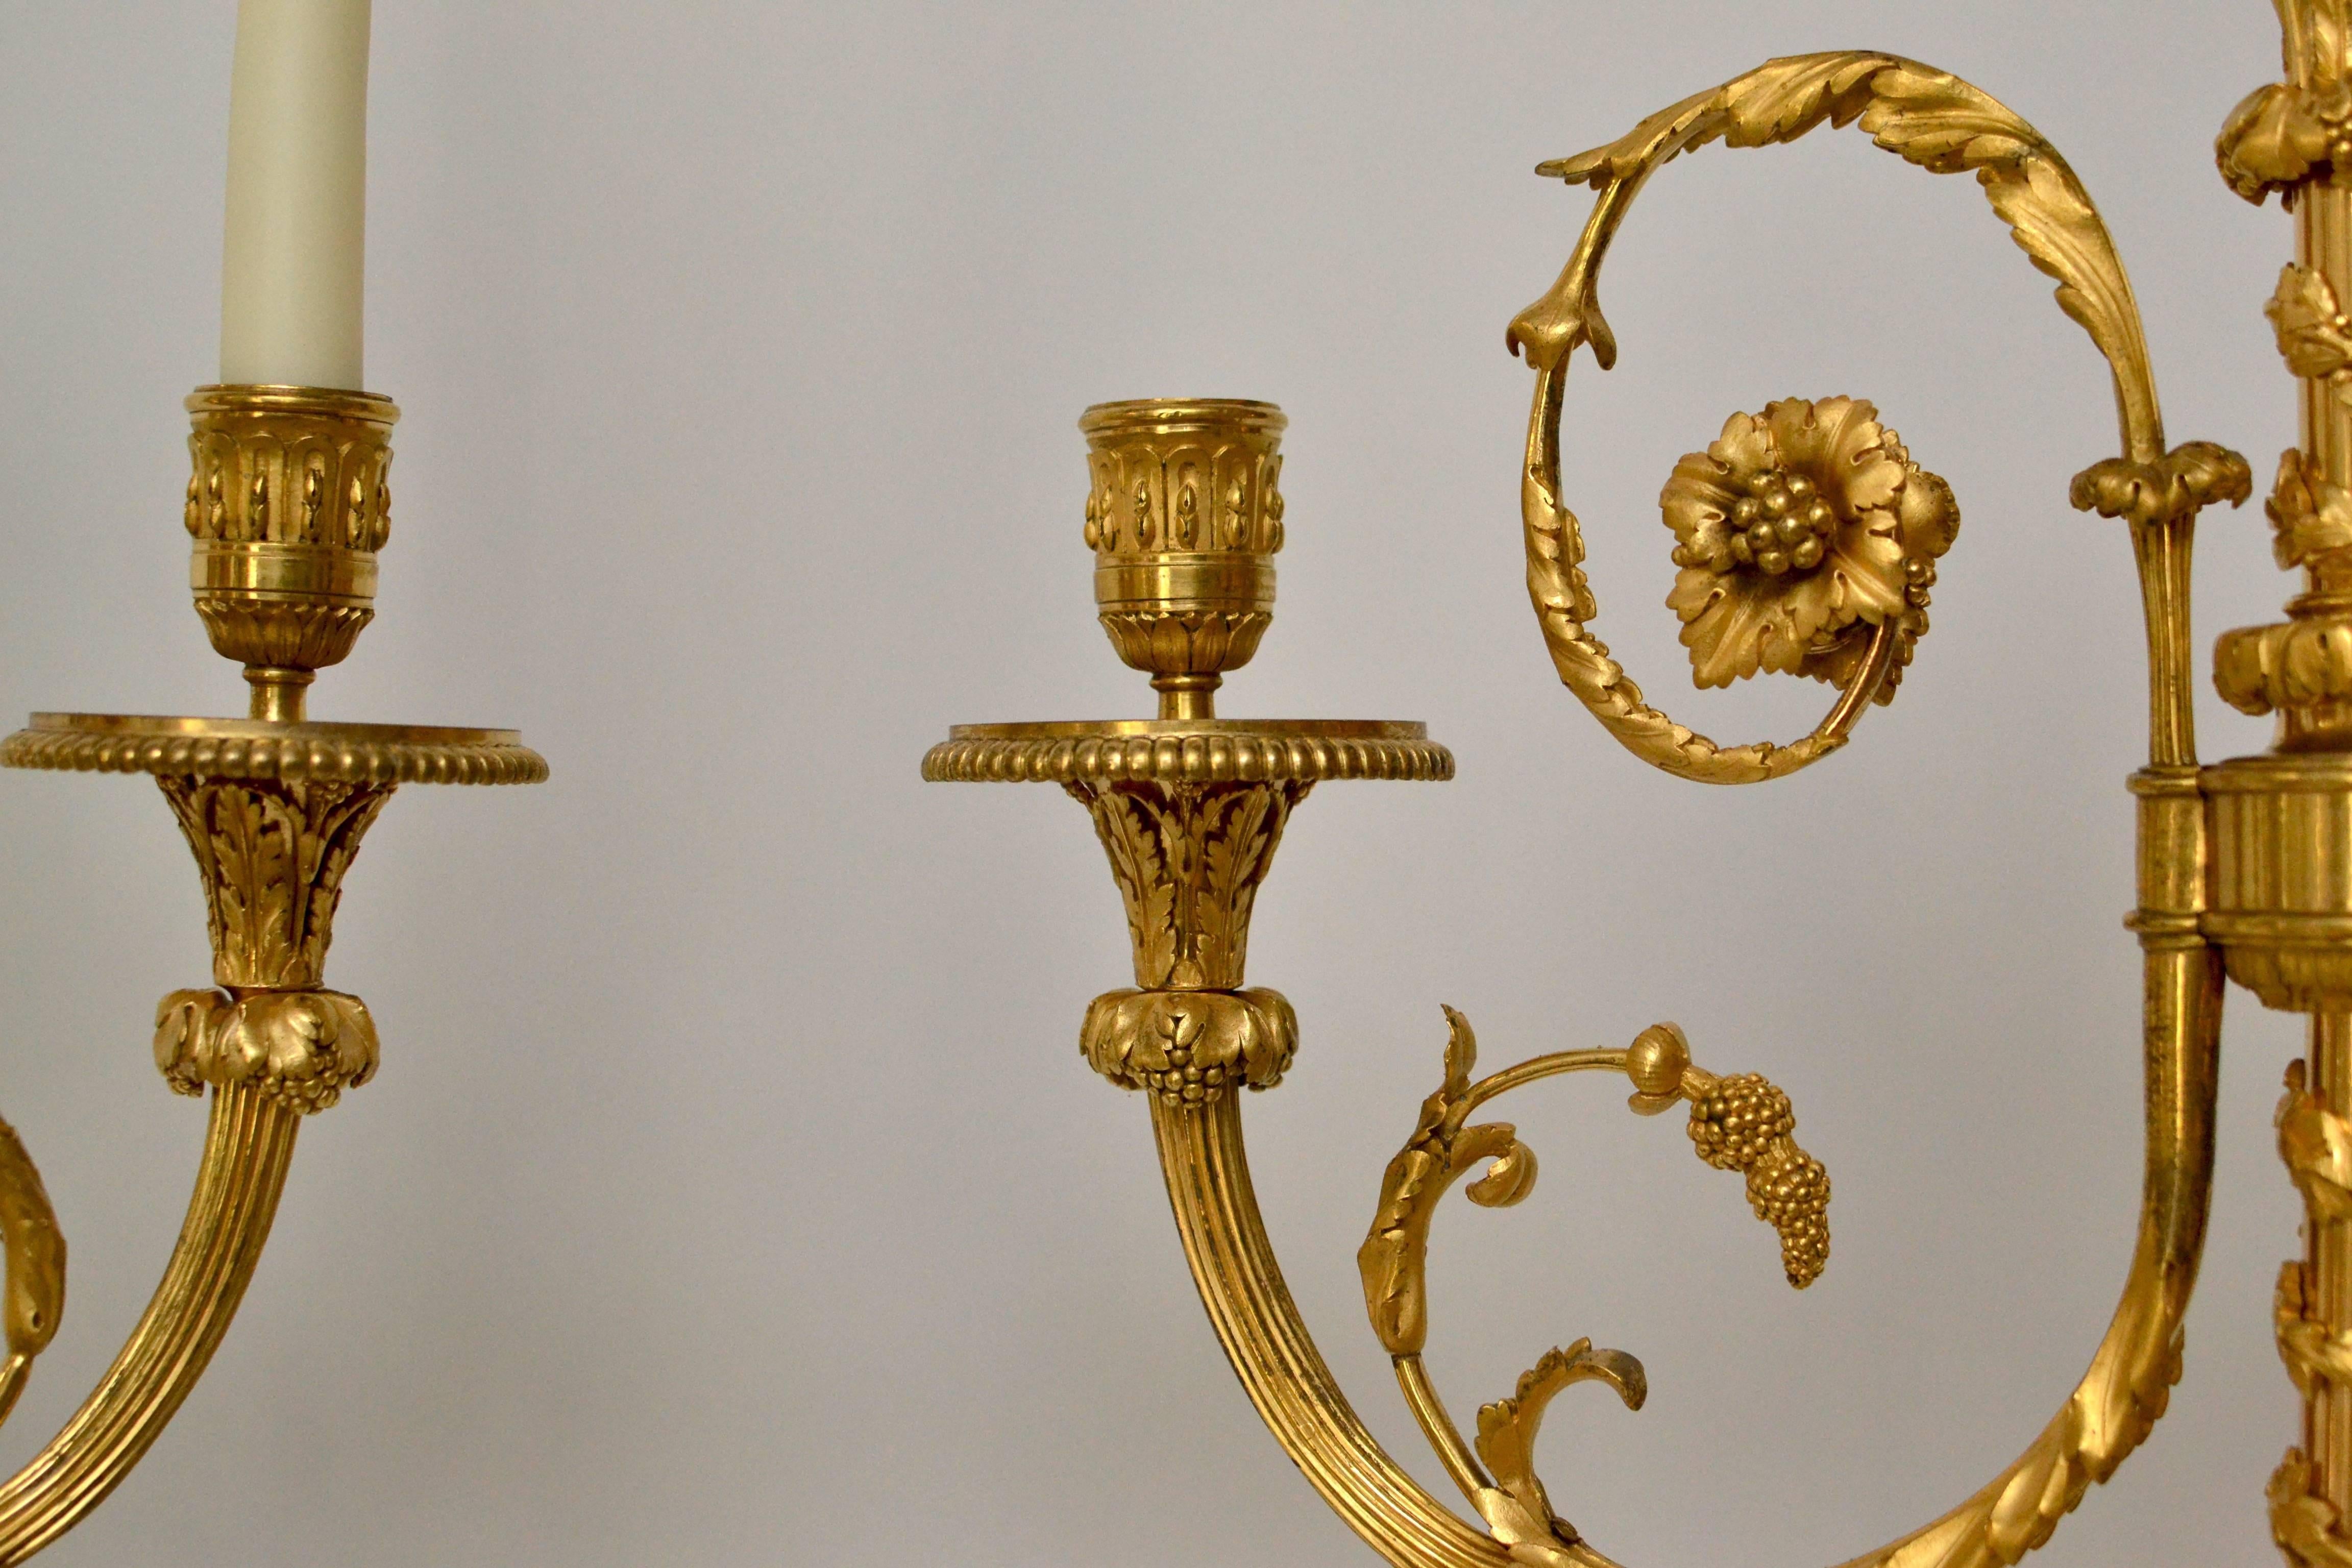 Important Pair of Louis XVI Candelabra Attributed to Francois Remond 1